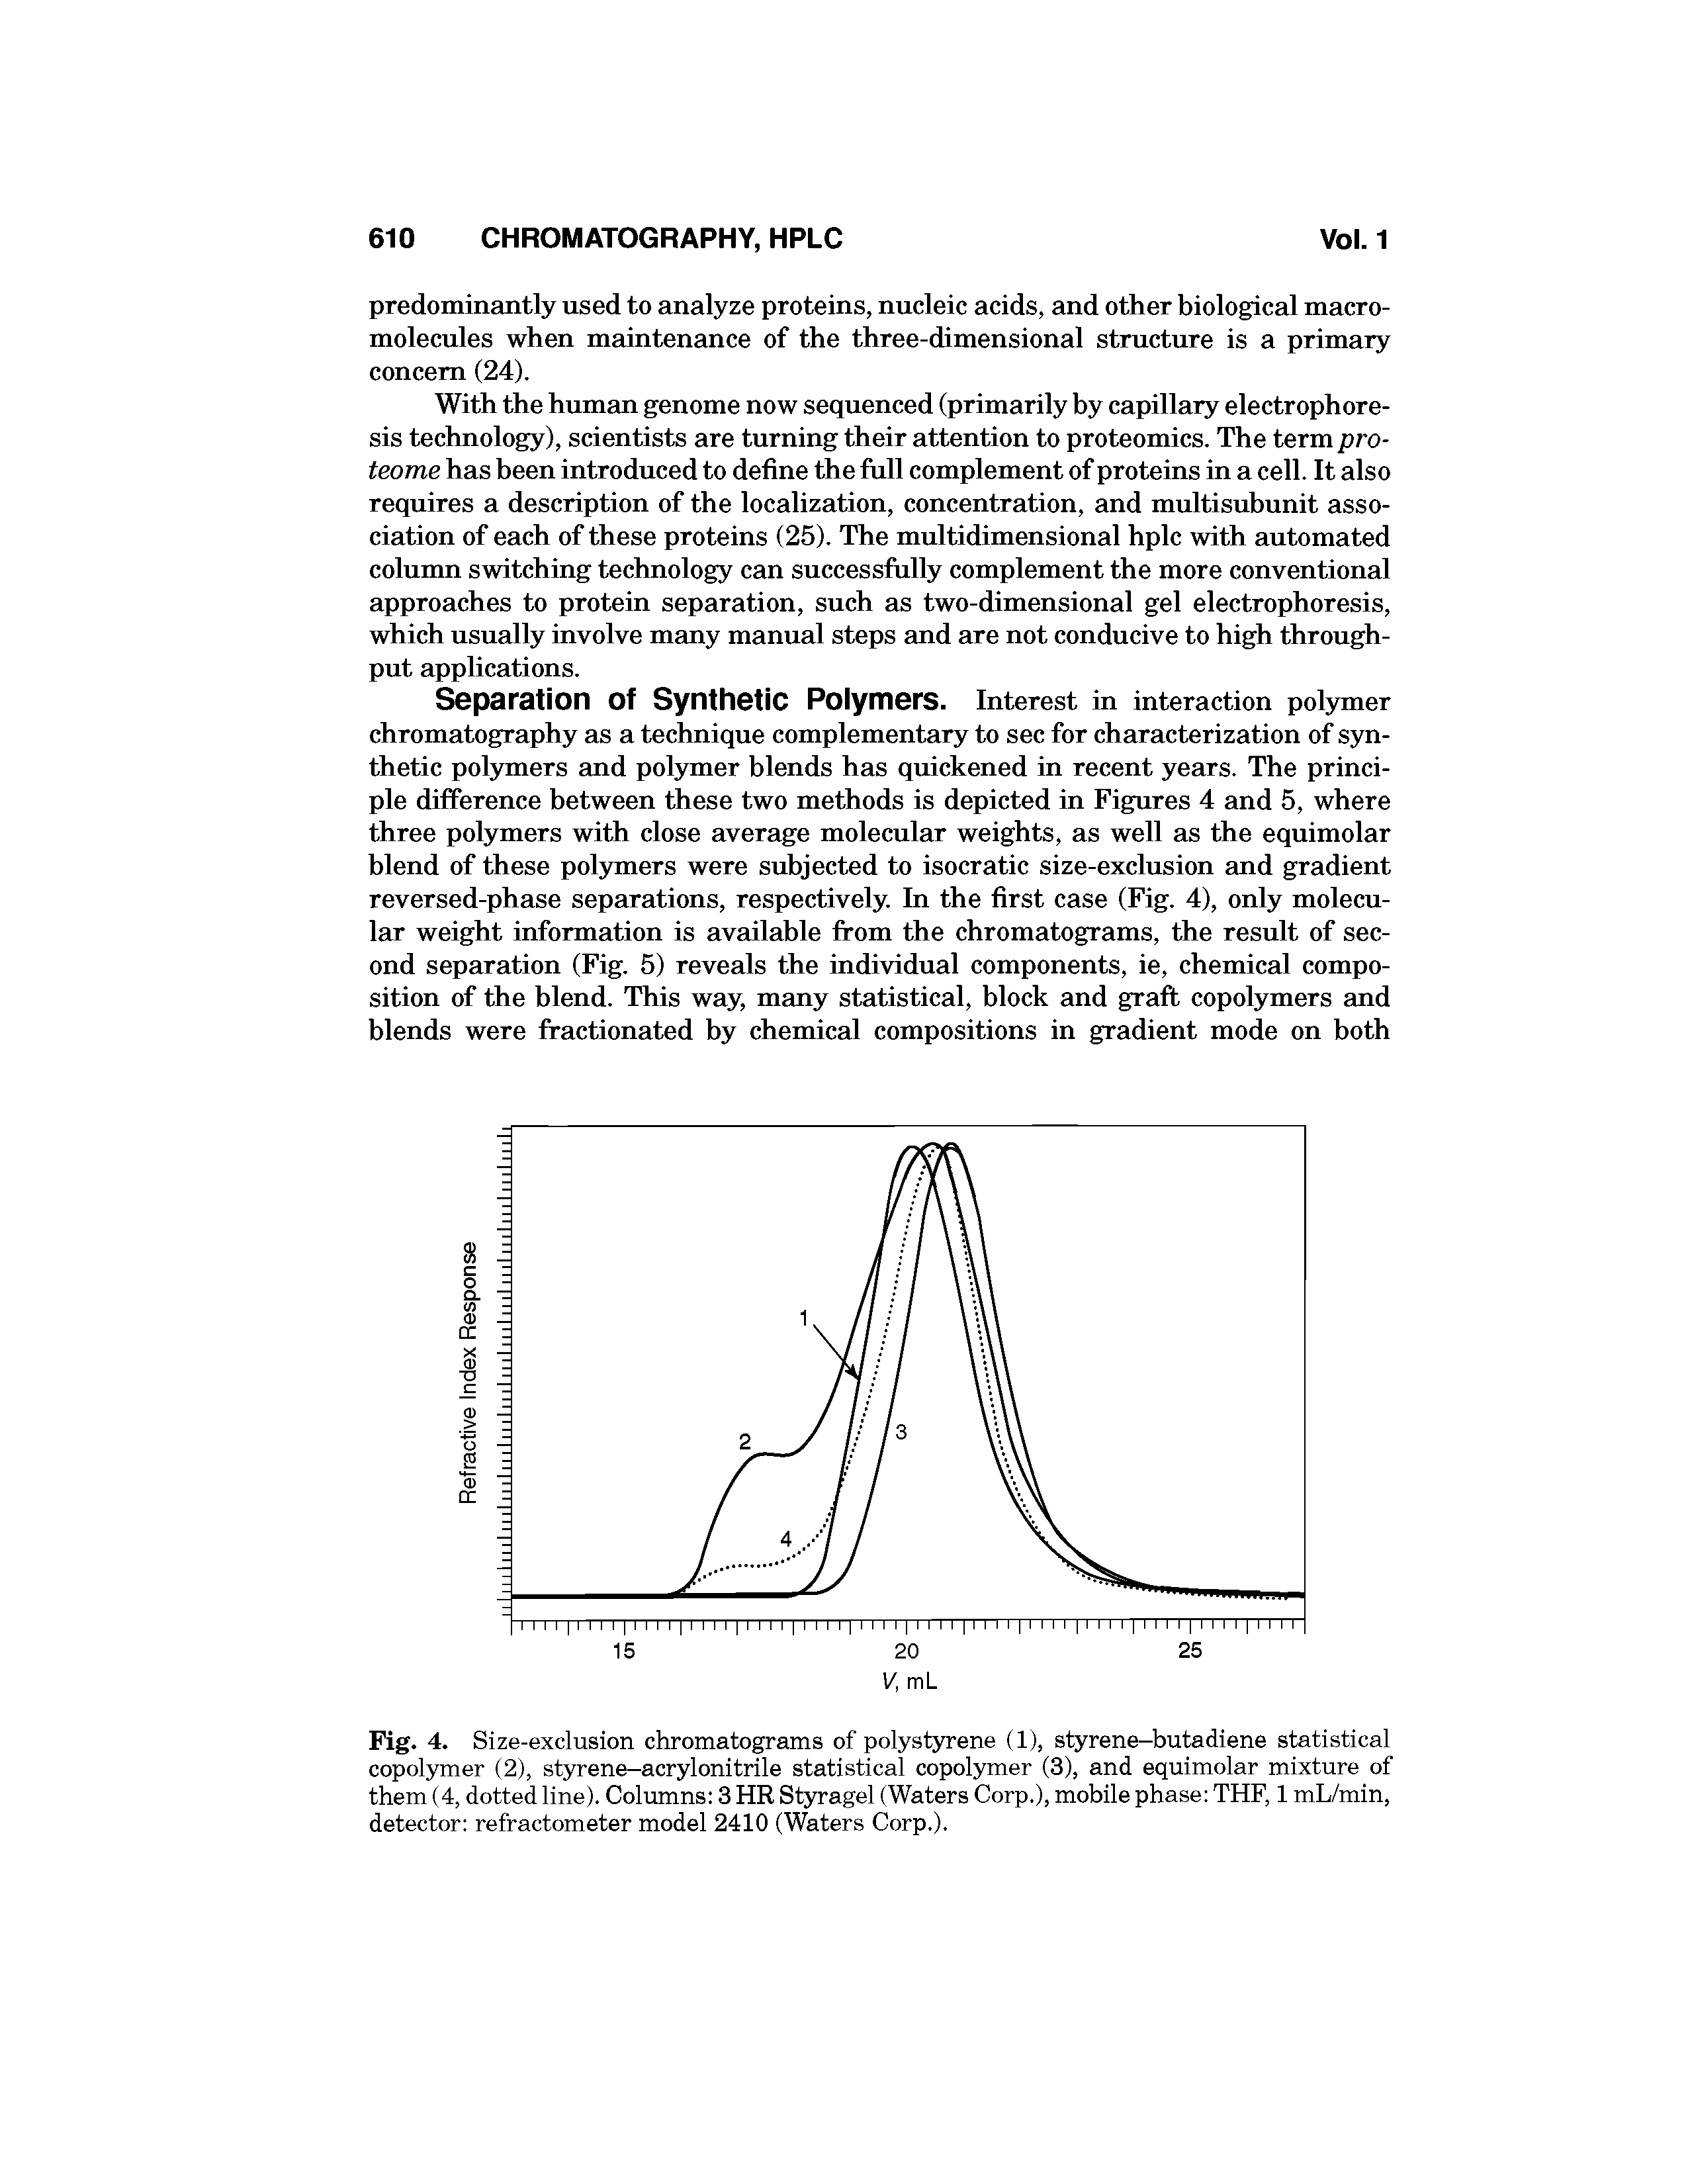 Fig. 4. Size-exclusion chromatograms of polystyrene (1), styrene-butadiene statistical copolymer (2), styrene-acrylonitrile statistical copolymer (3), and equimolar mixture of them (4, dotted line). Columns 3 HR Stjrragel (Waters Corp.), mobile phase THF, 1 mLi/min, detector refractometer model 2410 (Waters Corp.).